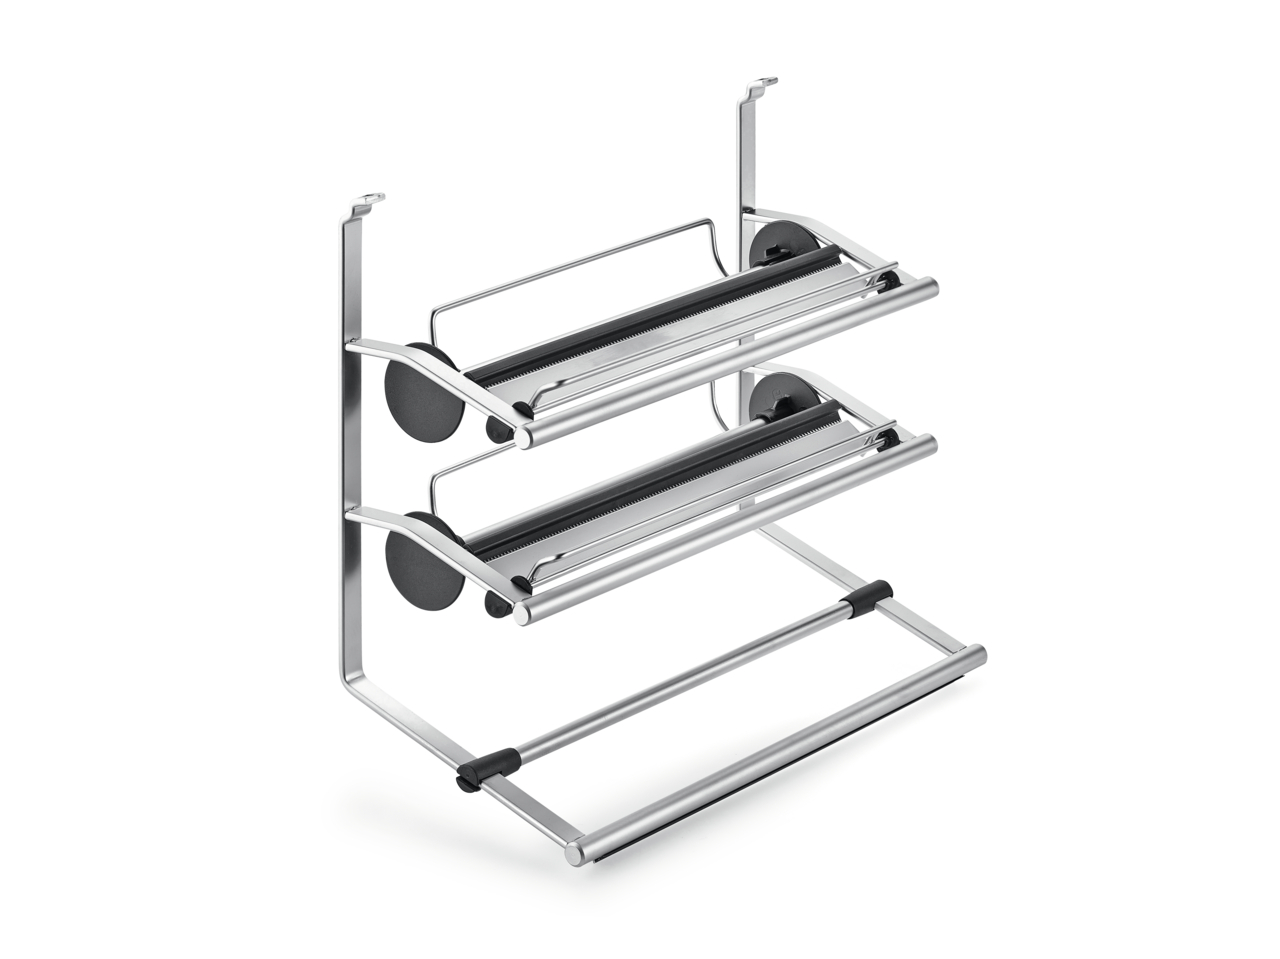  Linero 2000 roll holder, stainless steel coloured